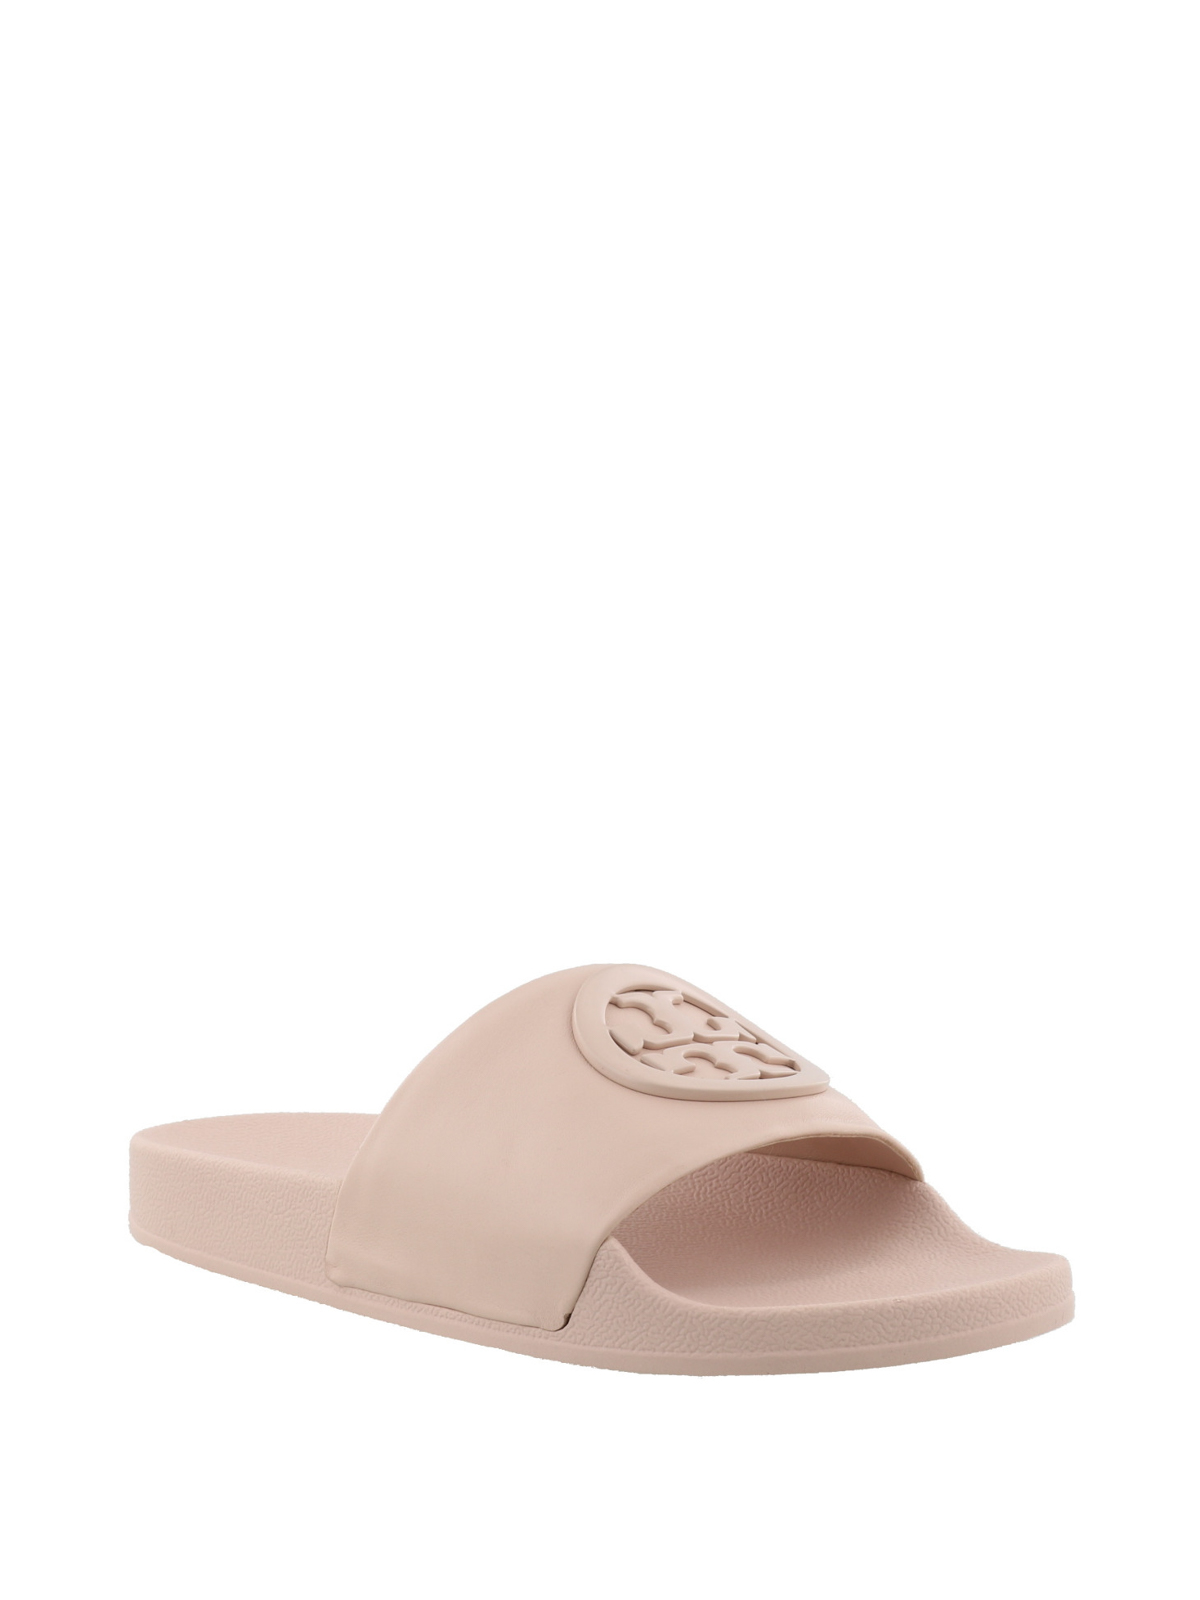 Tory Burch - Lina pink leather slide 